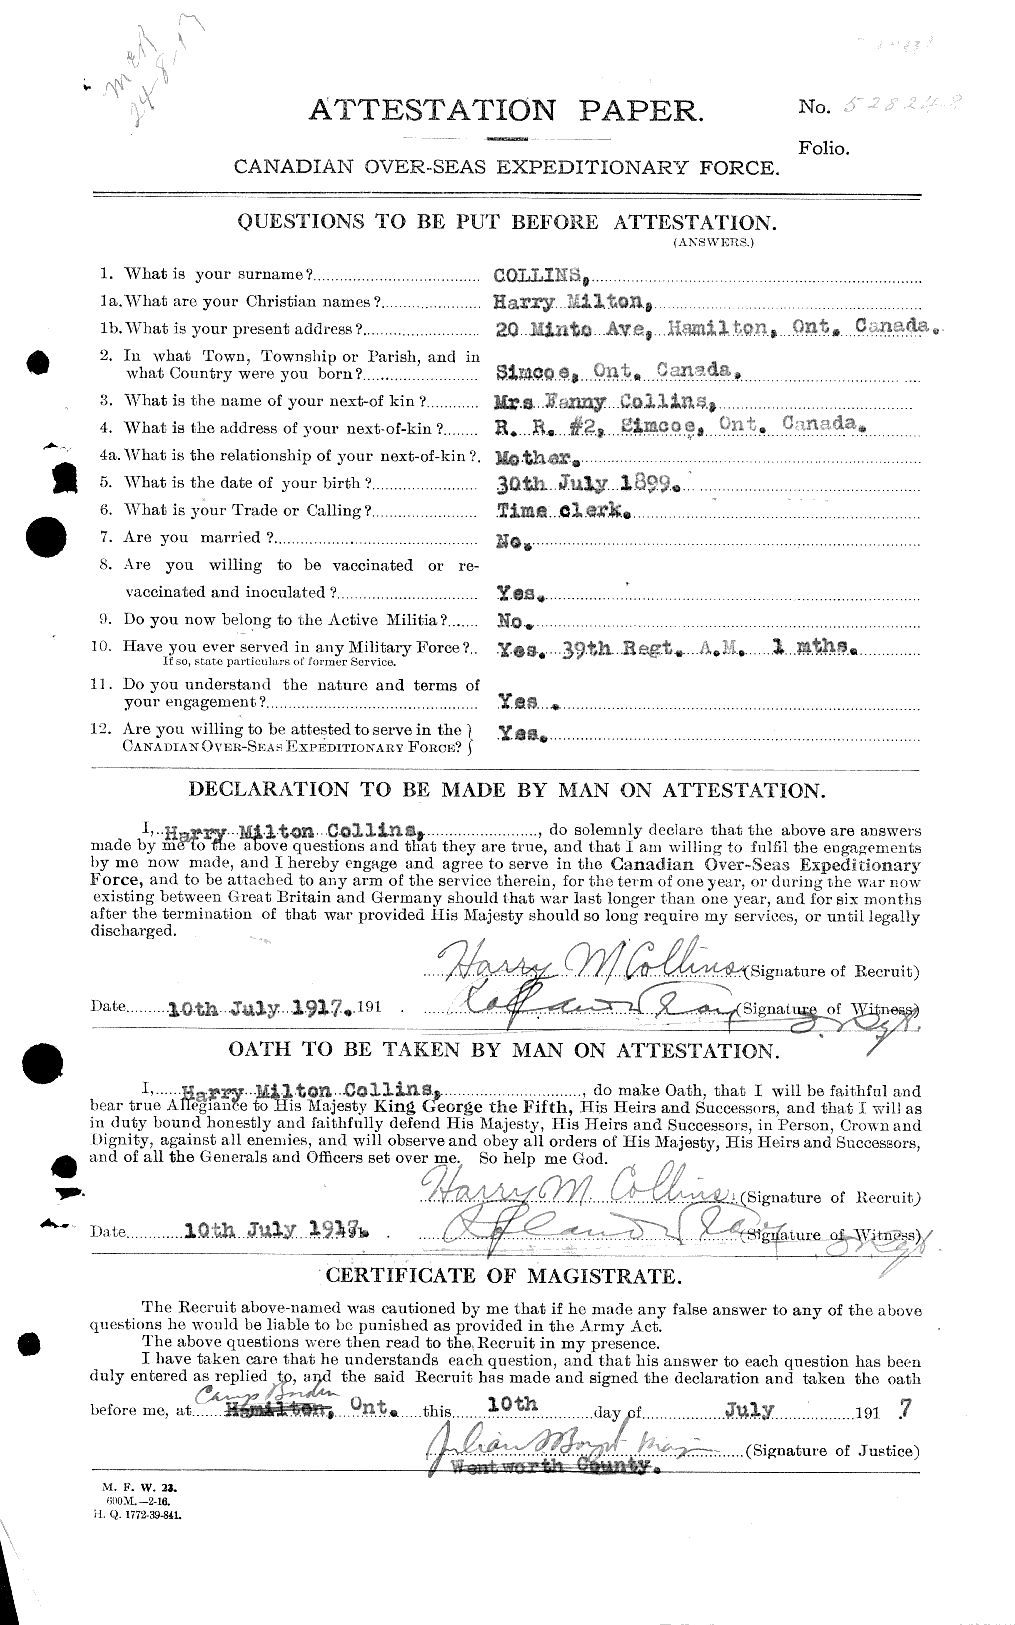 Personnel Records of the First World War - CEF 042282a